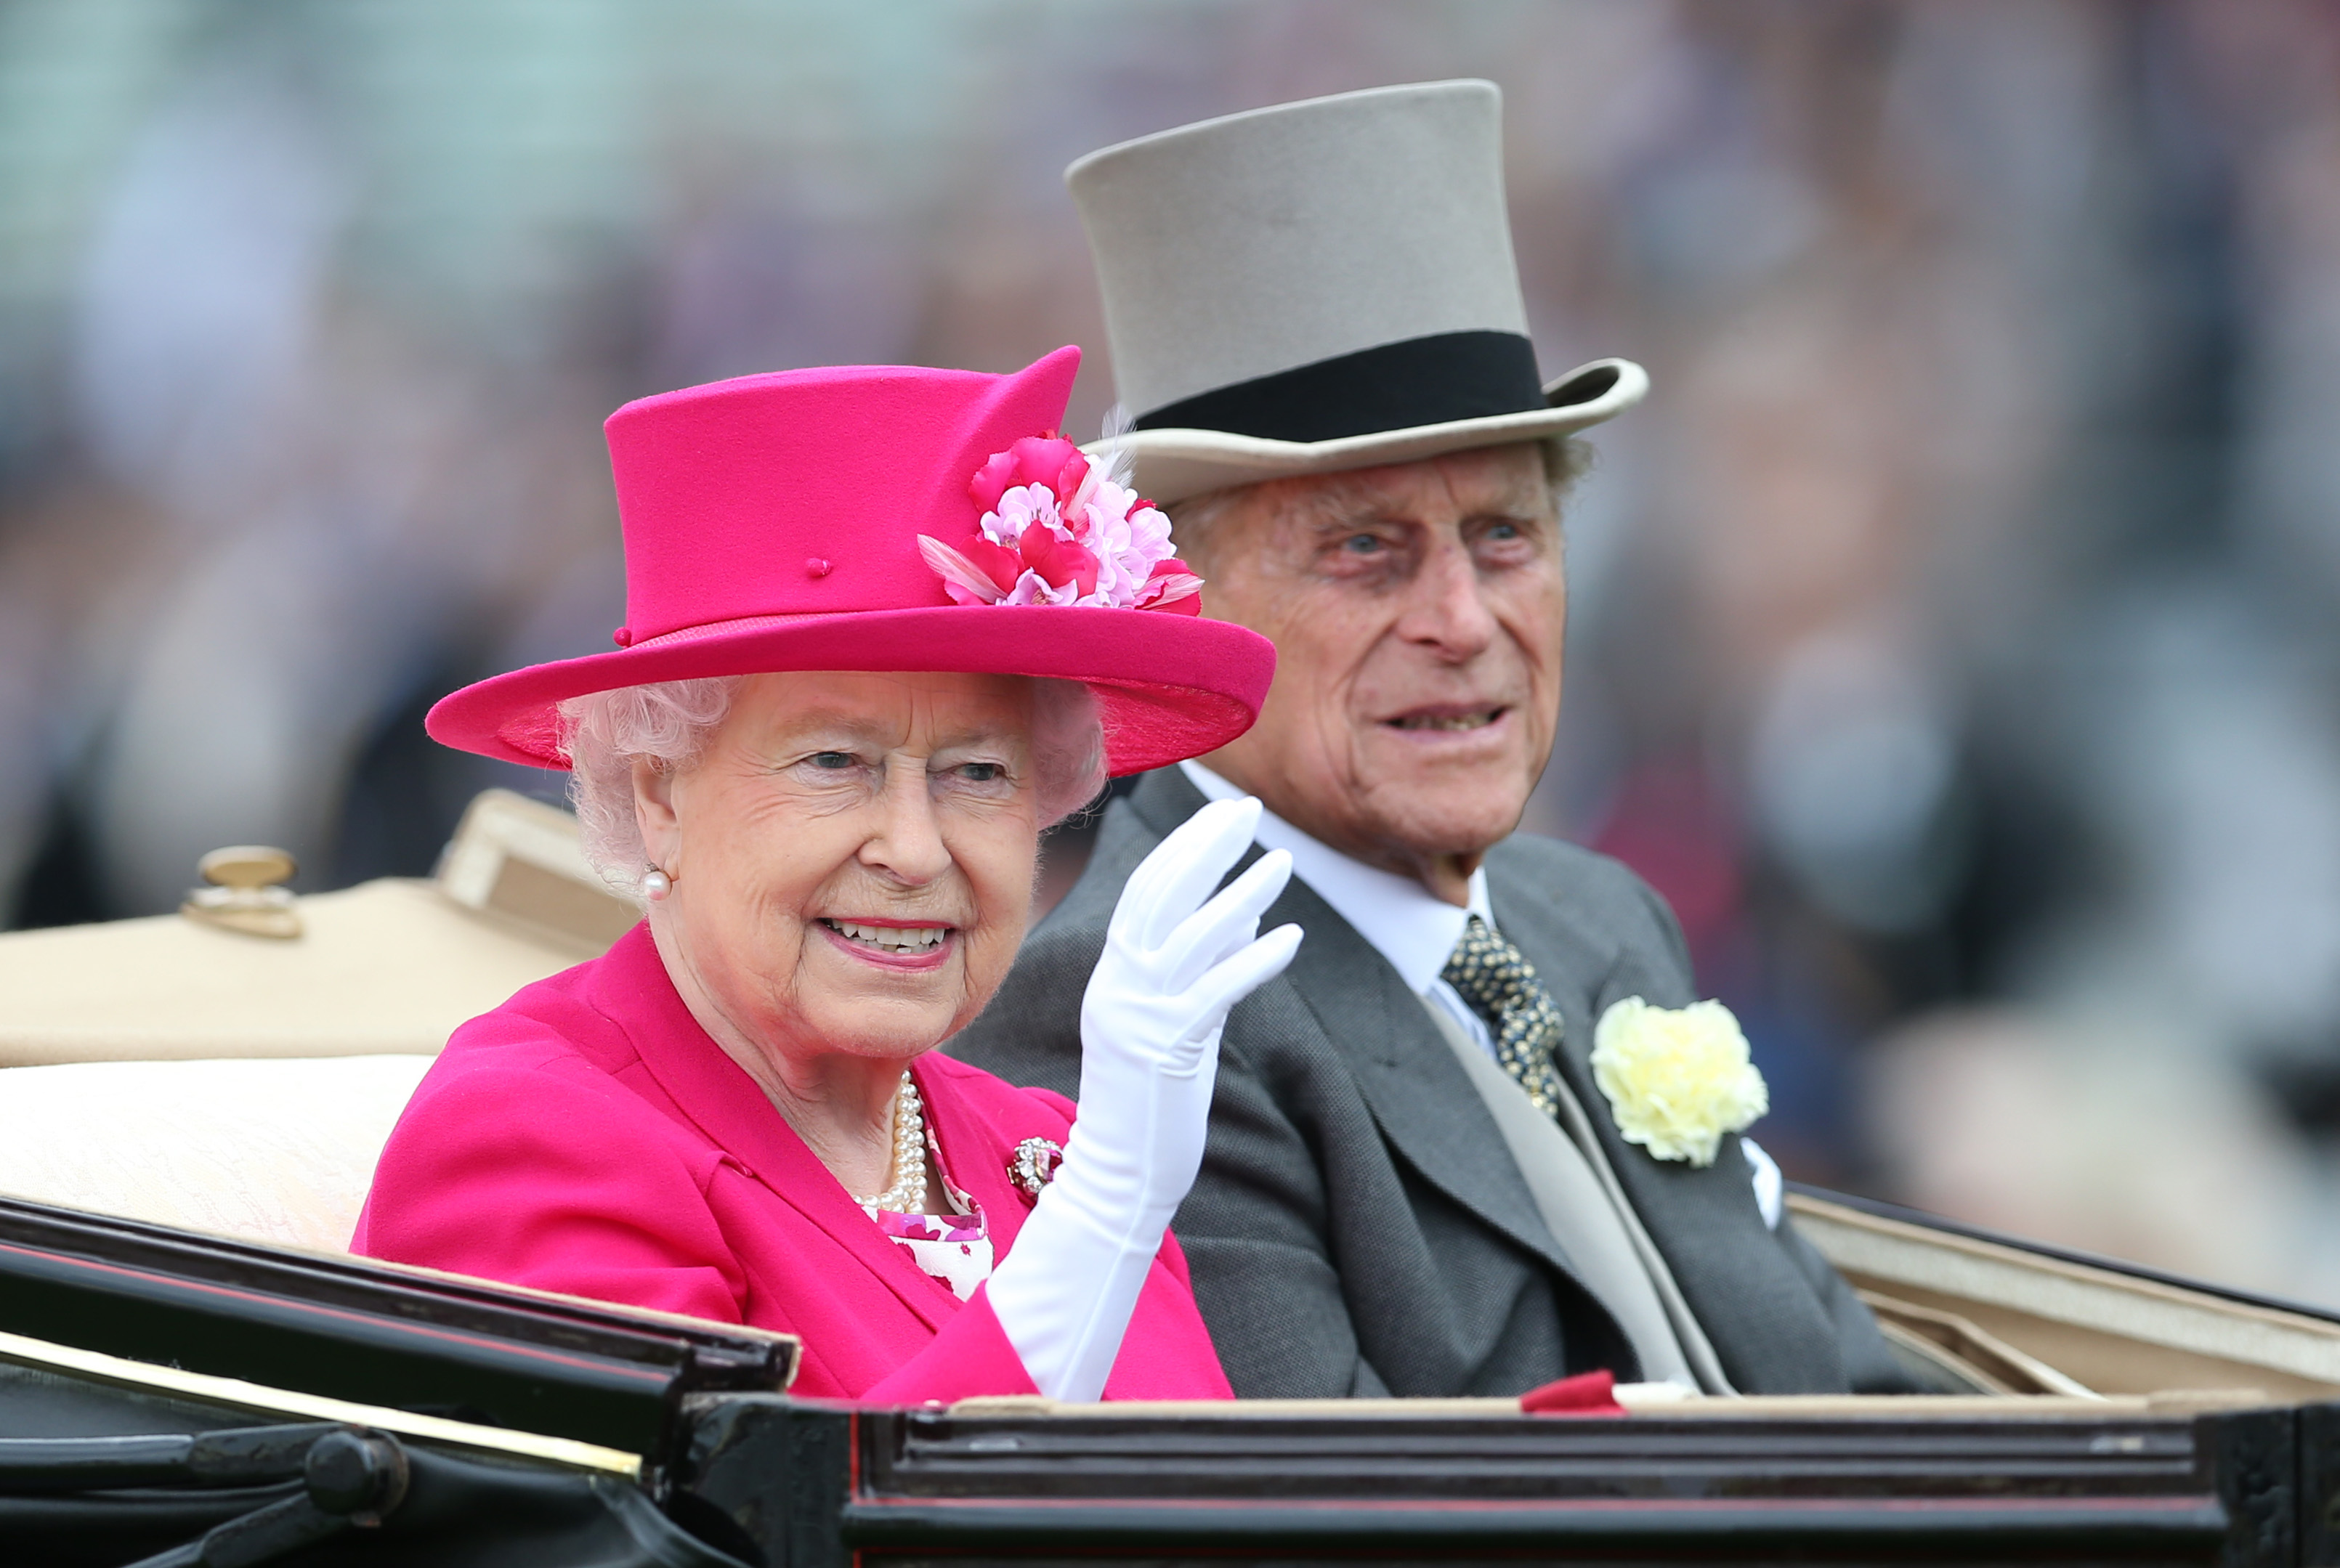 Horse Racing - Royal Ascot - Ascot Racecourse - 16/6/15 Britain's Queen Elizabeth and her husband Prince Philip arrive at Ascot Action Images via Reuters / Matthew Childs Livepic